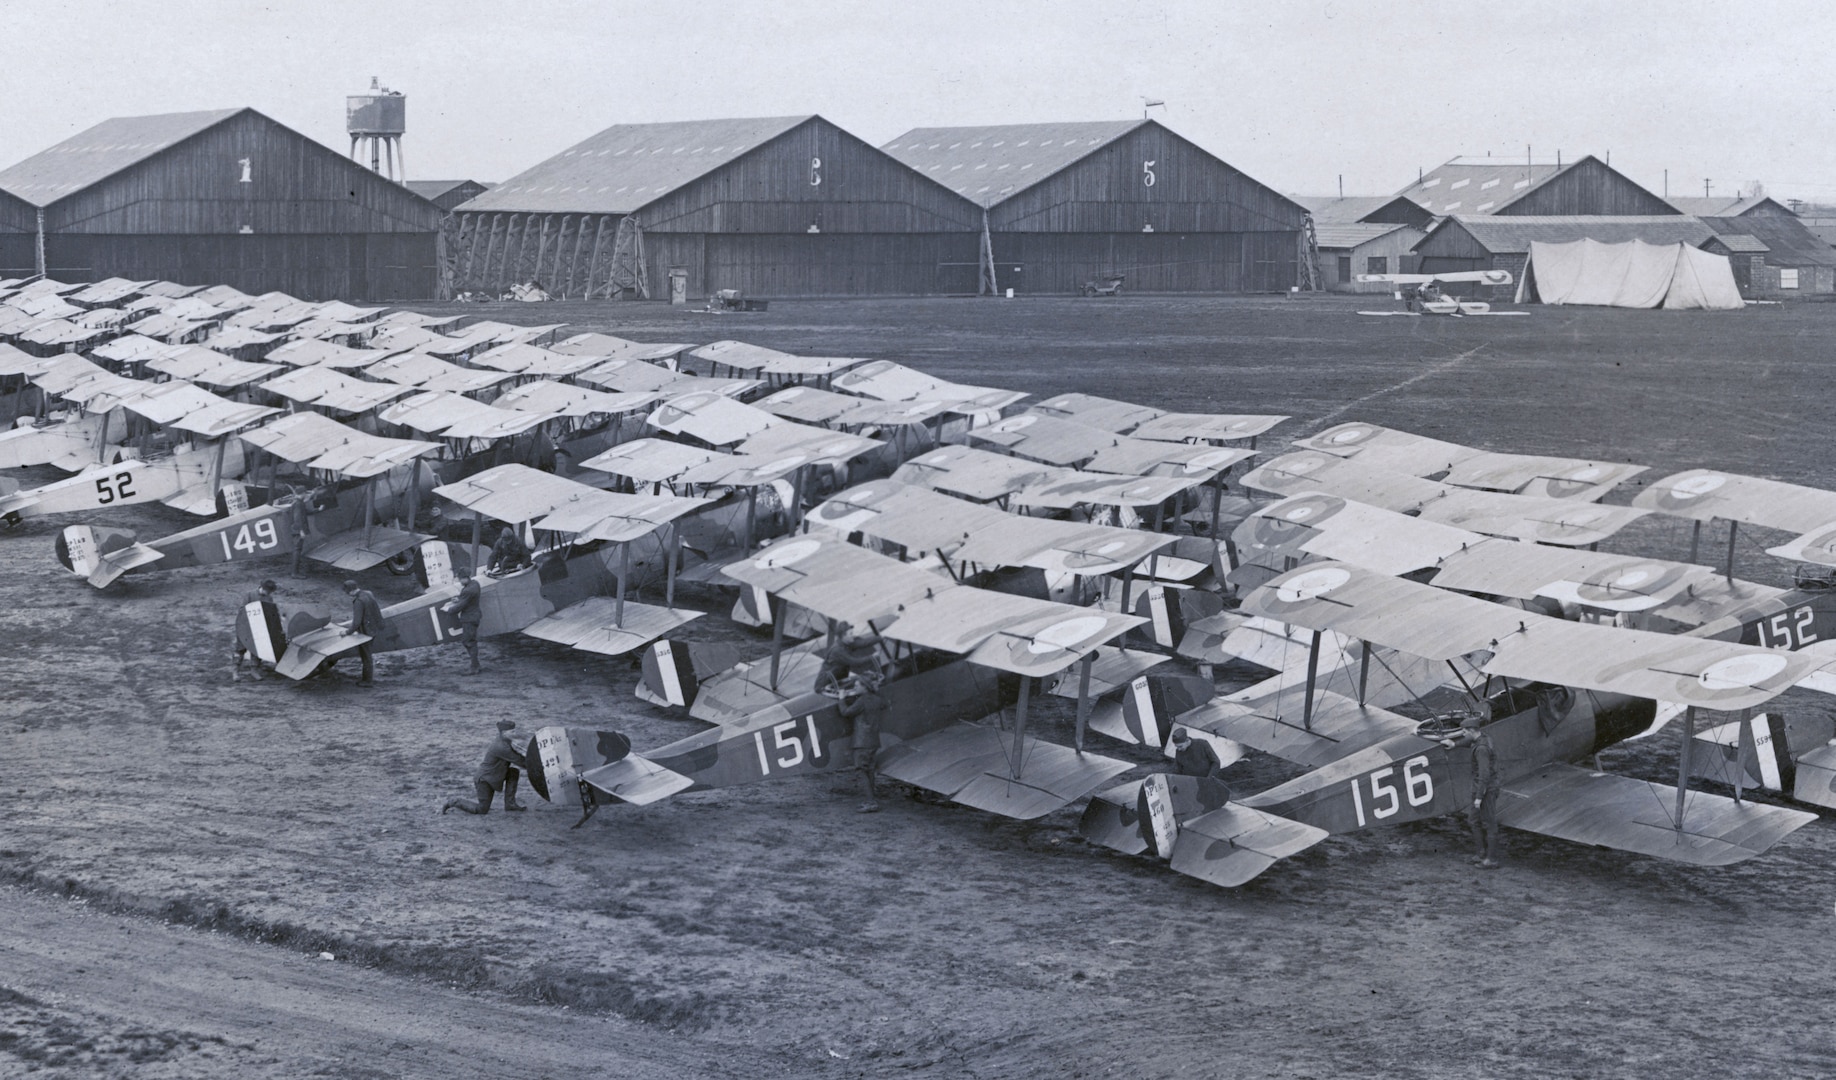 "The Ships," American Expeditionary Forces, Second Air Instructional Center, Tours Aerodrome, France, late 1918 (Lester F. Kirchner Collection, U.S. Army Air Service)